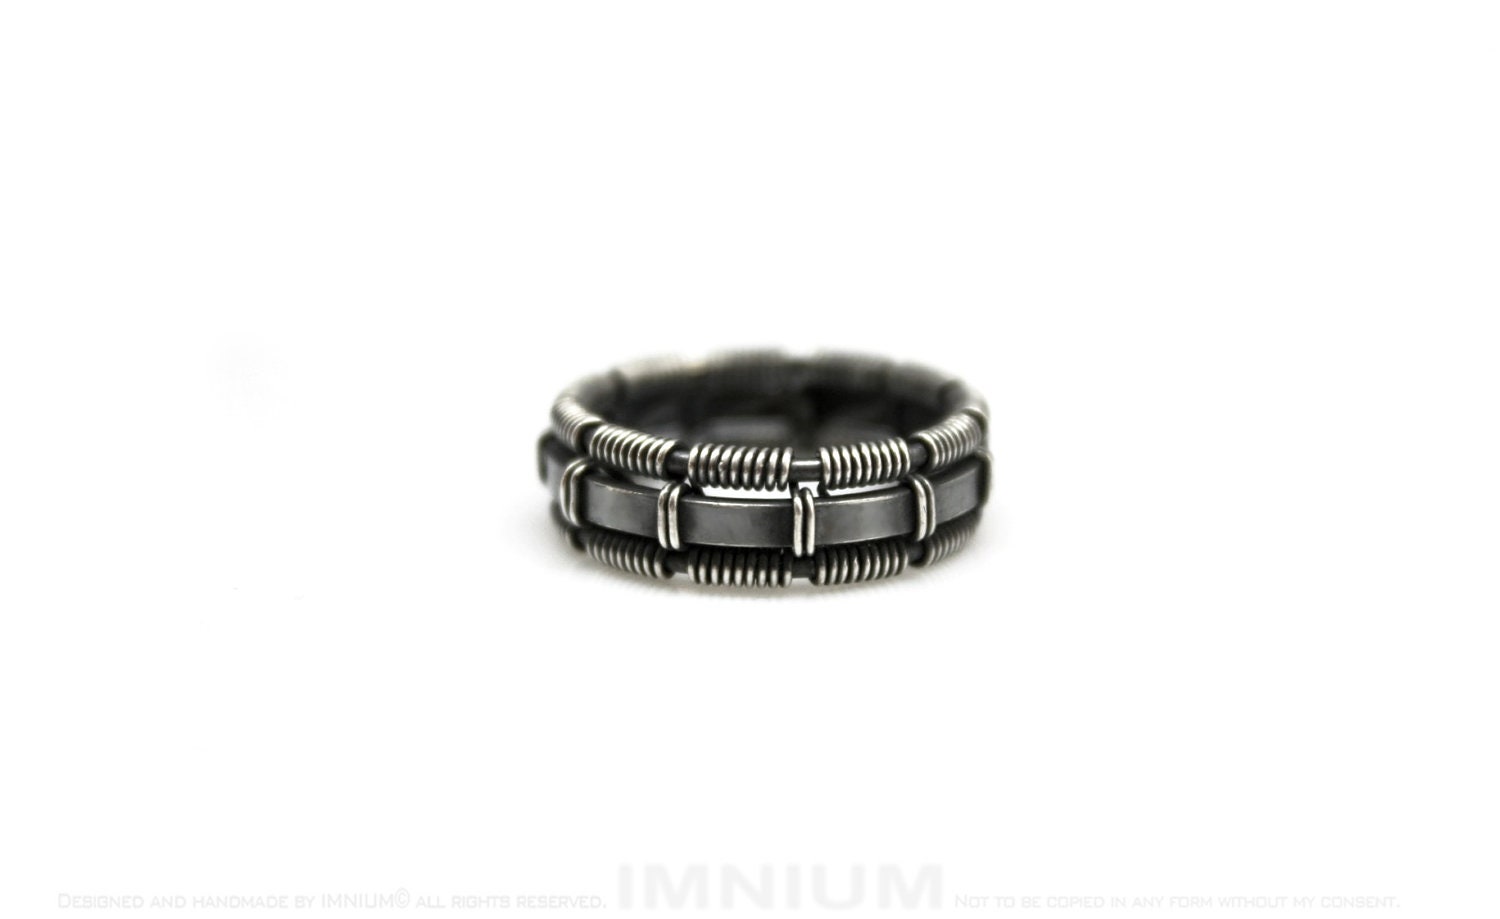 Industrial sterling silver wire wrapped ring US size 6 modern simple unisex band metal dark oxidized FREE shipping - IMNIUM